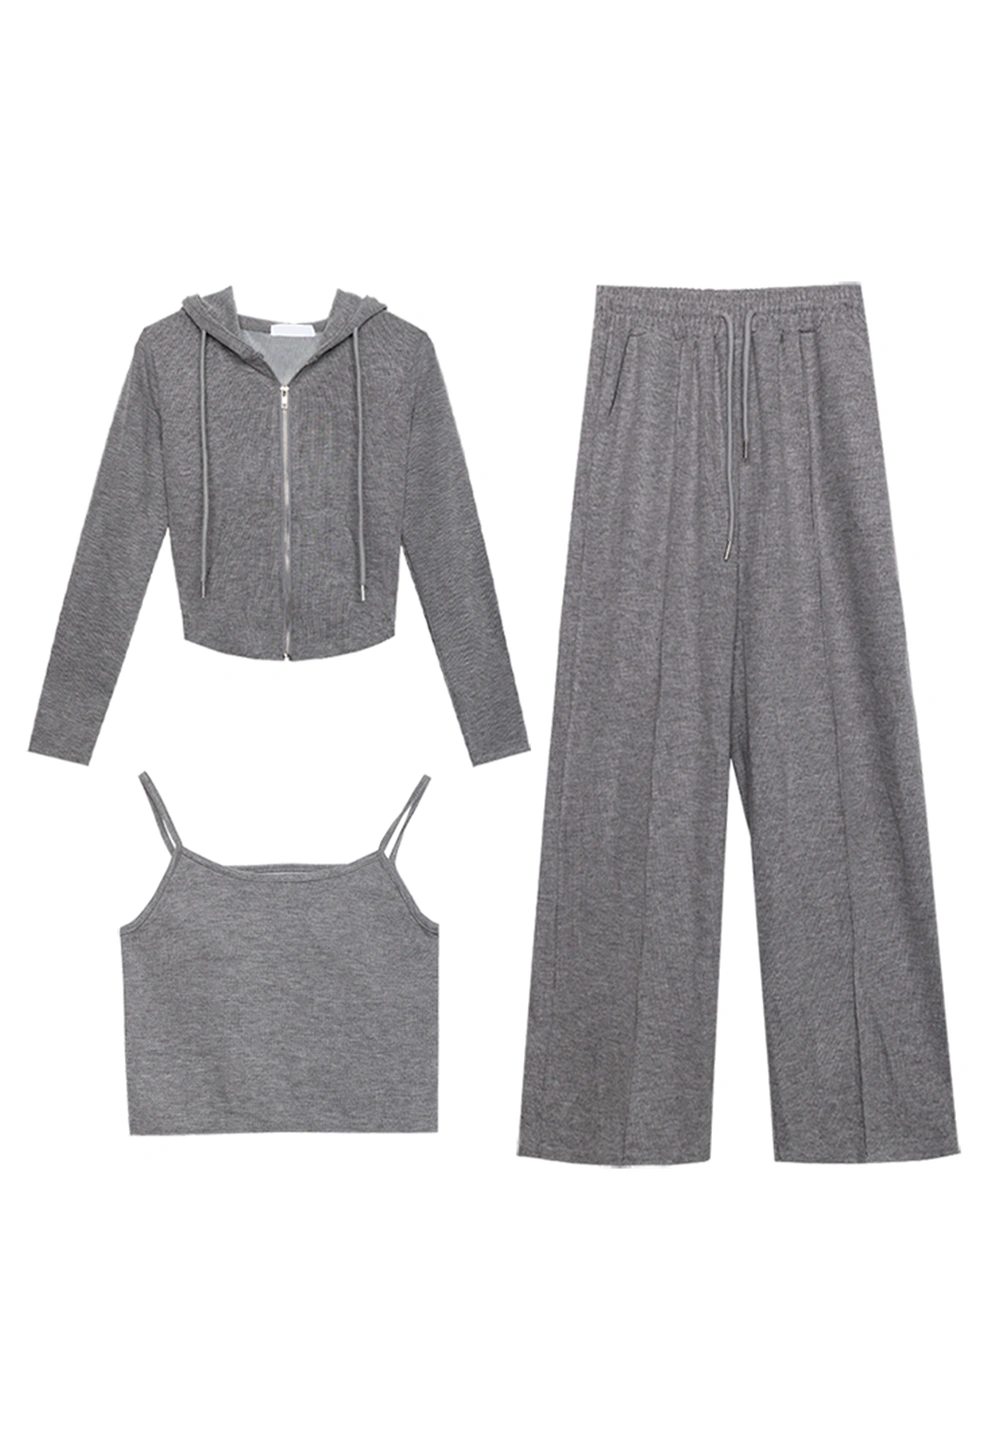 Women's 3-Piece Lounge Set: Zip-Up Hoodie, Camisole, and Wide-Leg Pants